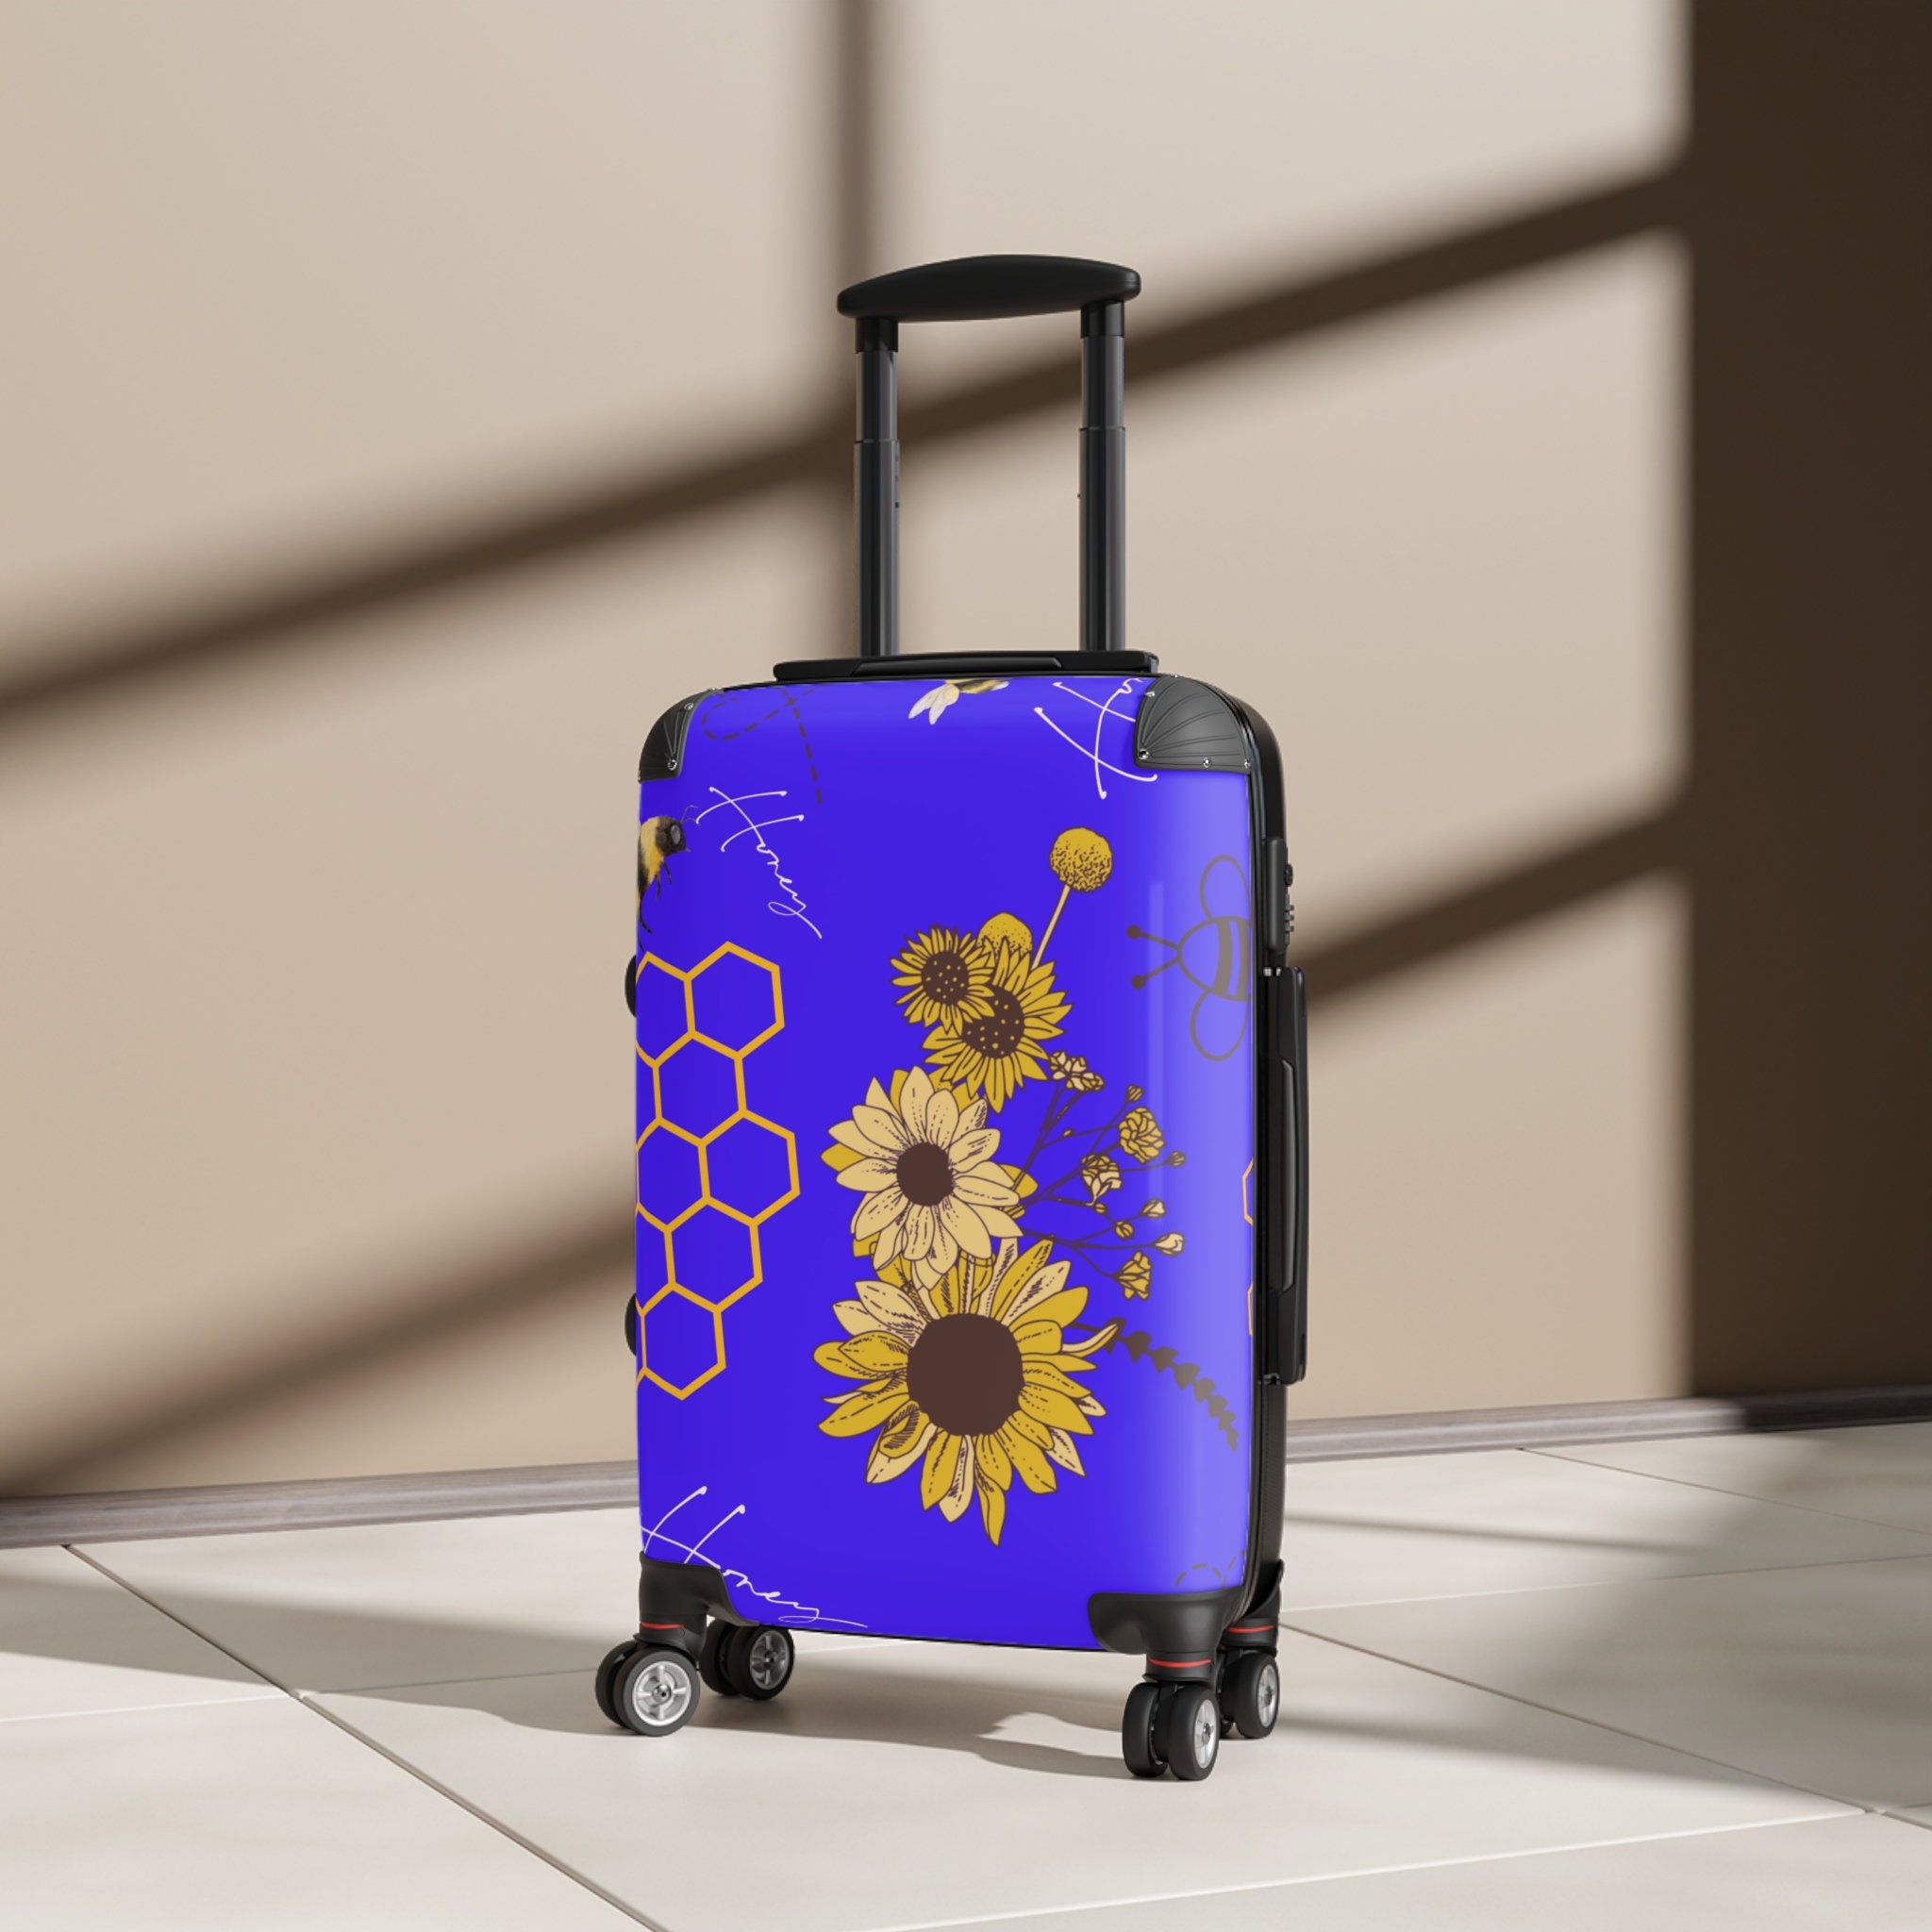 Honey Bee Suitcases/Fun Luggage/ Luggage for him or her